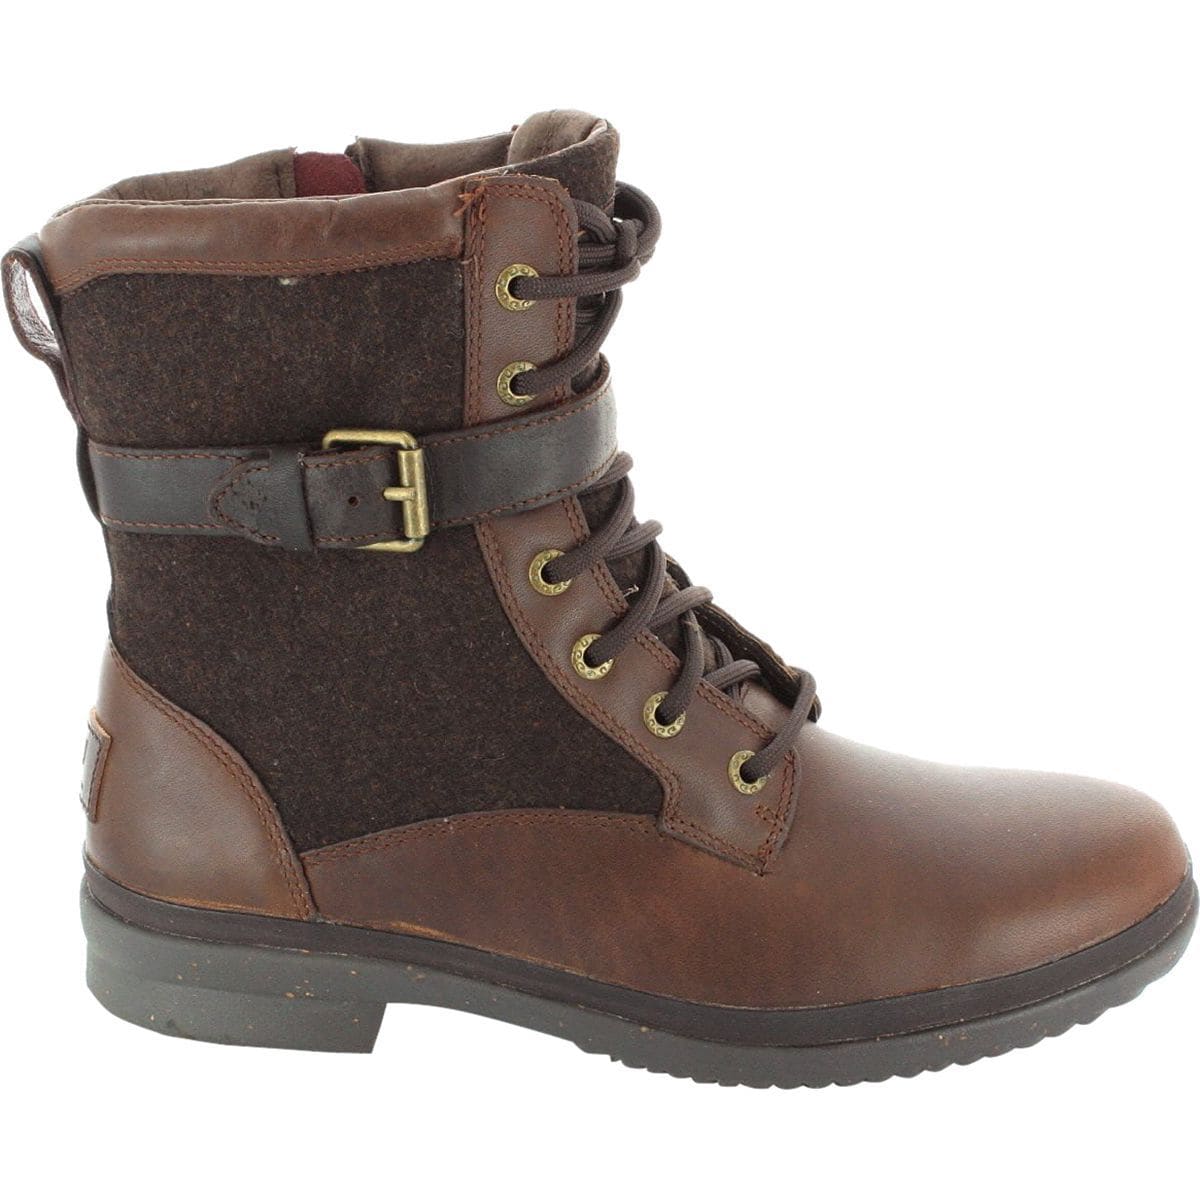 kesey ugg boots sale